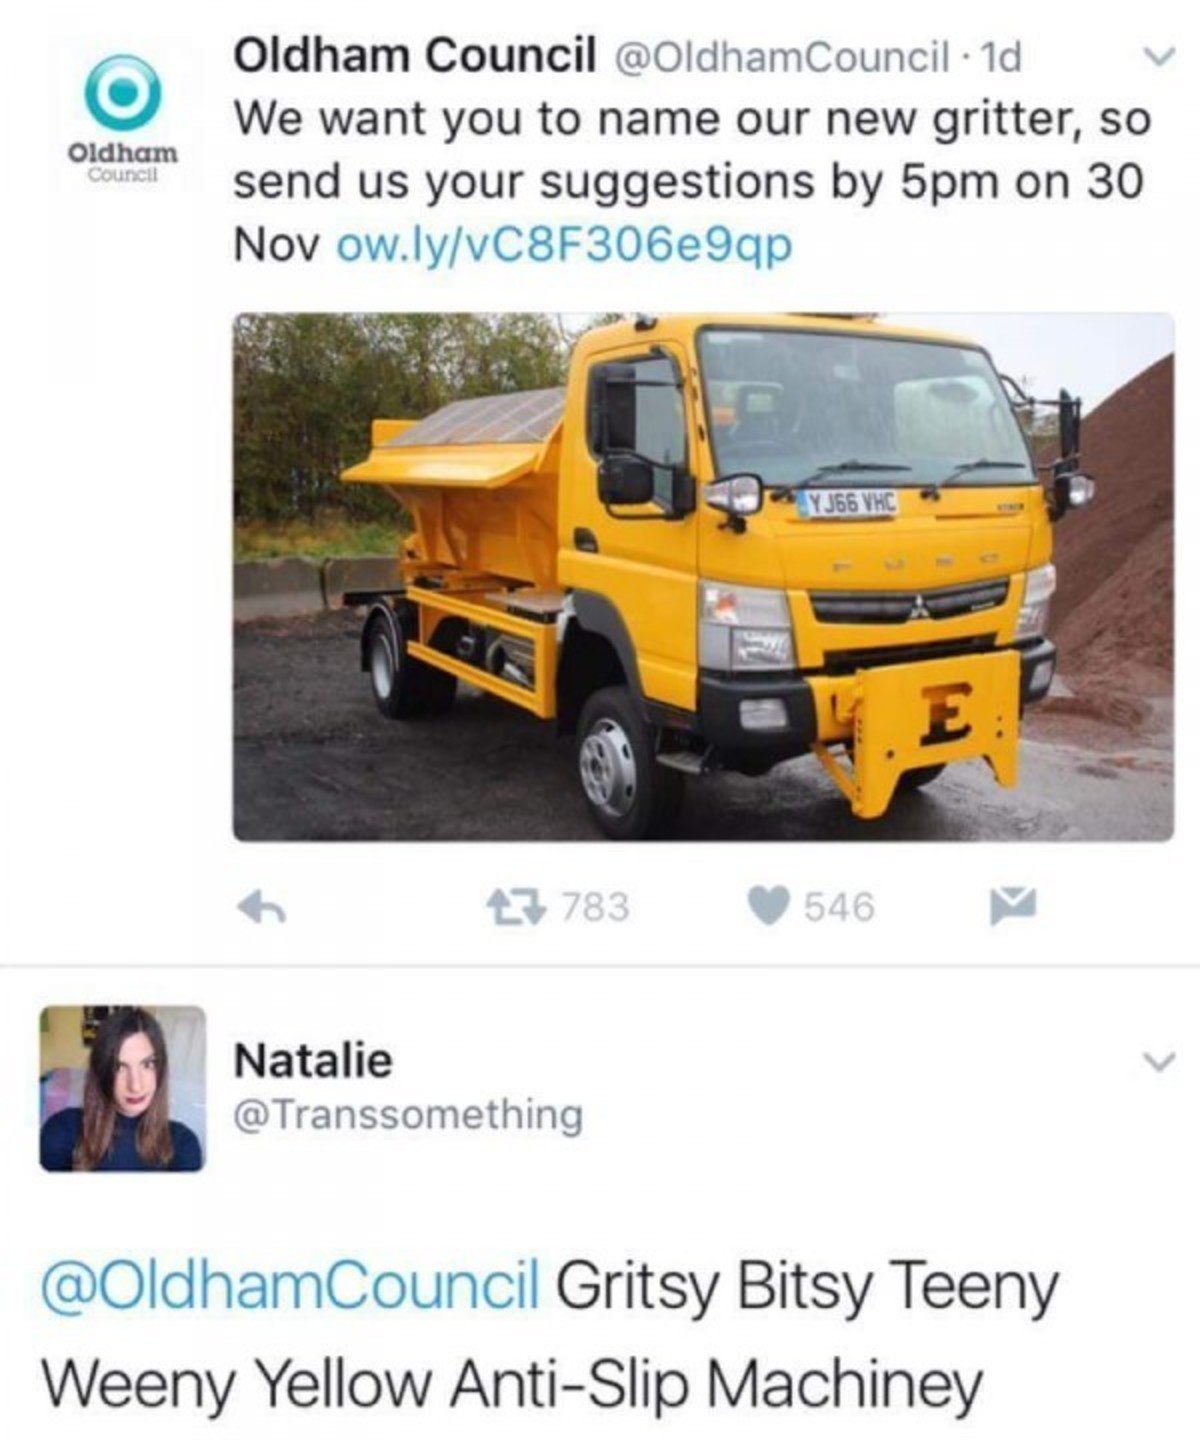 teeny weeny anti slip machiney - Oldham Council Oldham Council . 1d We want you to name our new gritter, so send us your suggestions by 5pm on 30 Nov ow.lyvC8F306e9qp YJ66 Vhc 13783 546 Natalie Gritsy Bitsy Teeny Weeny Yellow AntiSlip Machiney